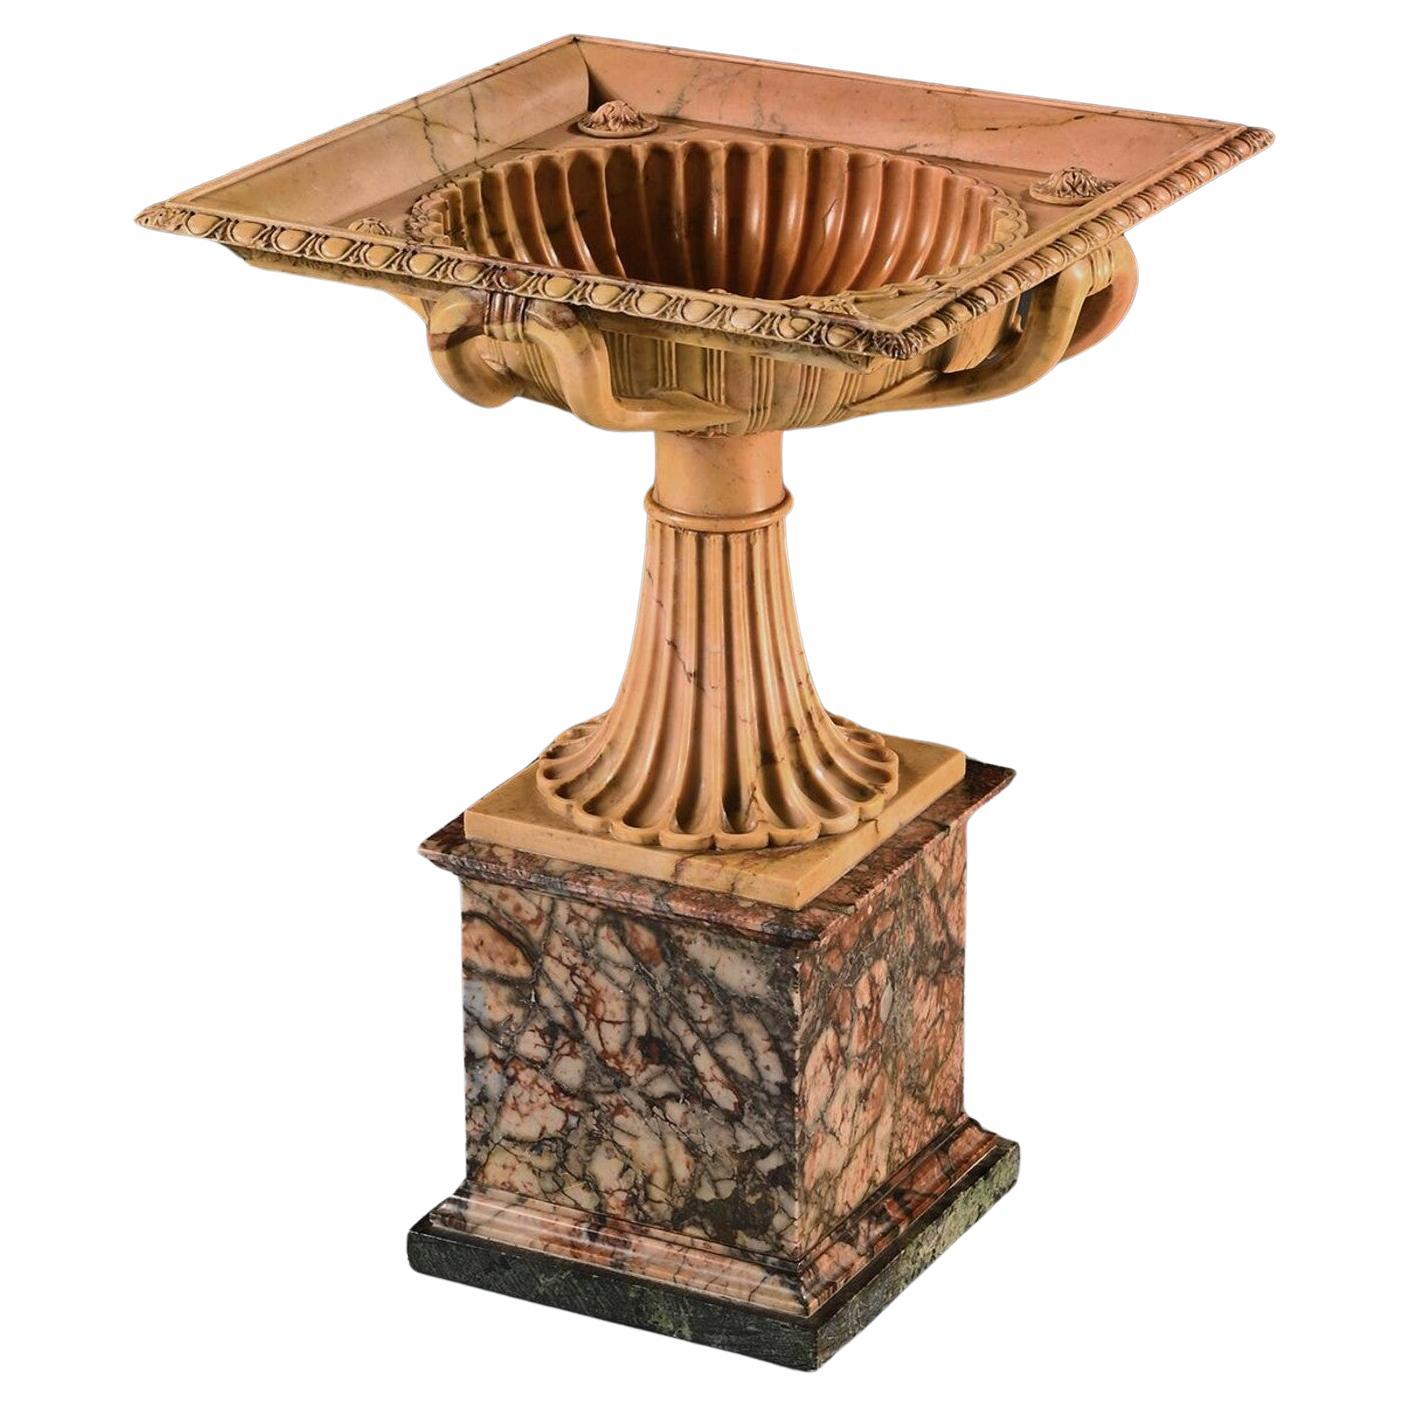 An Exquisite Giallo Antico Tazza of Unusual Square Section With Finely Carved In